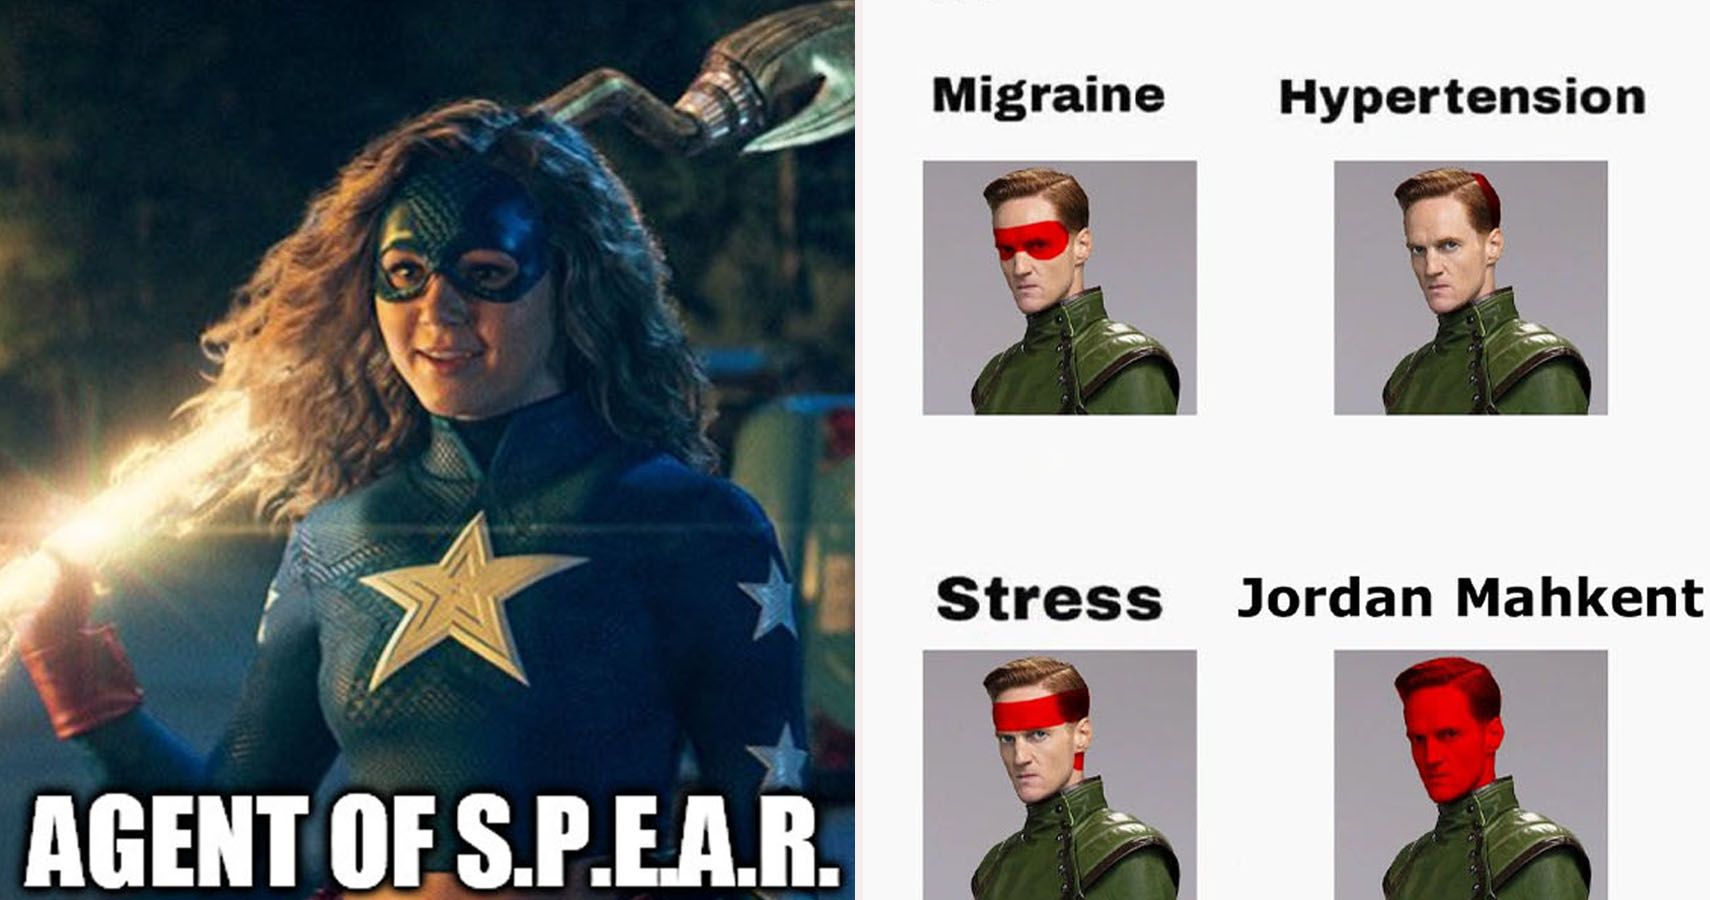 Split images agent of spear meme and icicle headache meme.